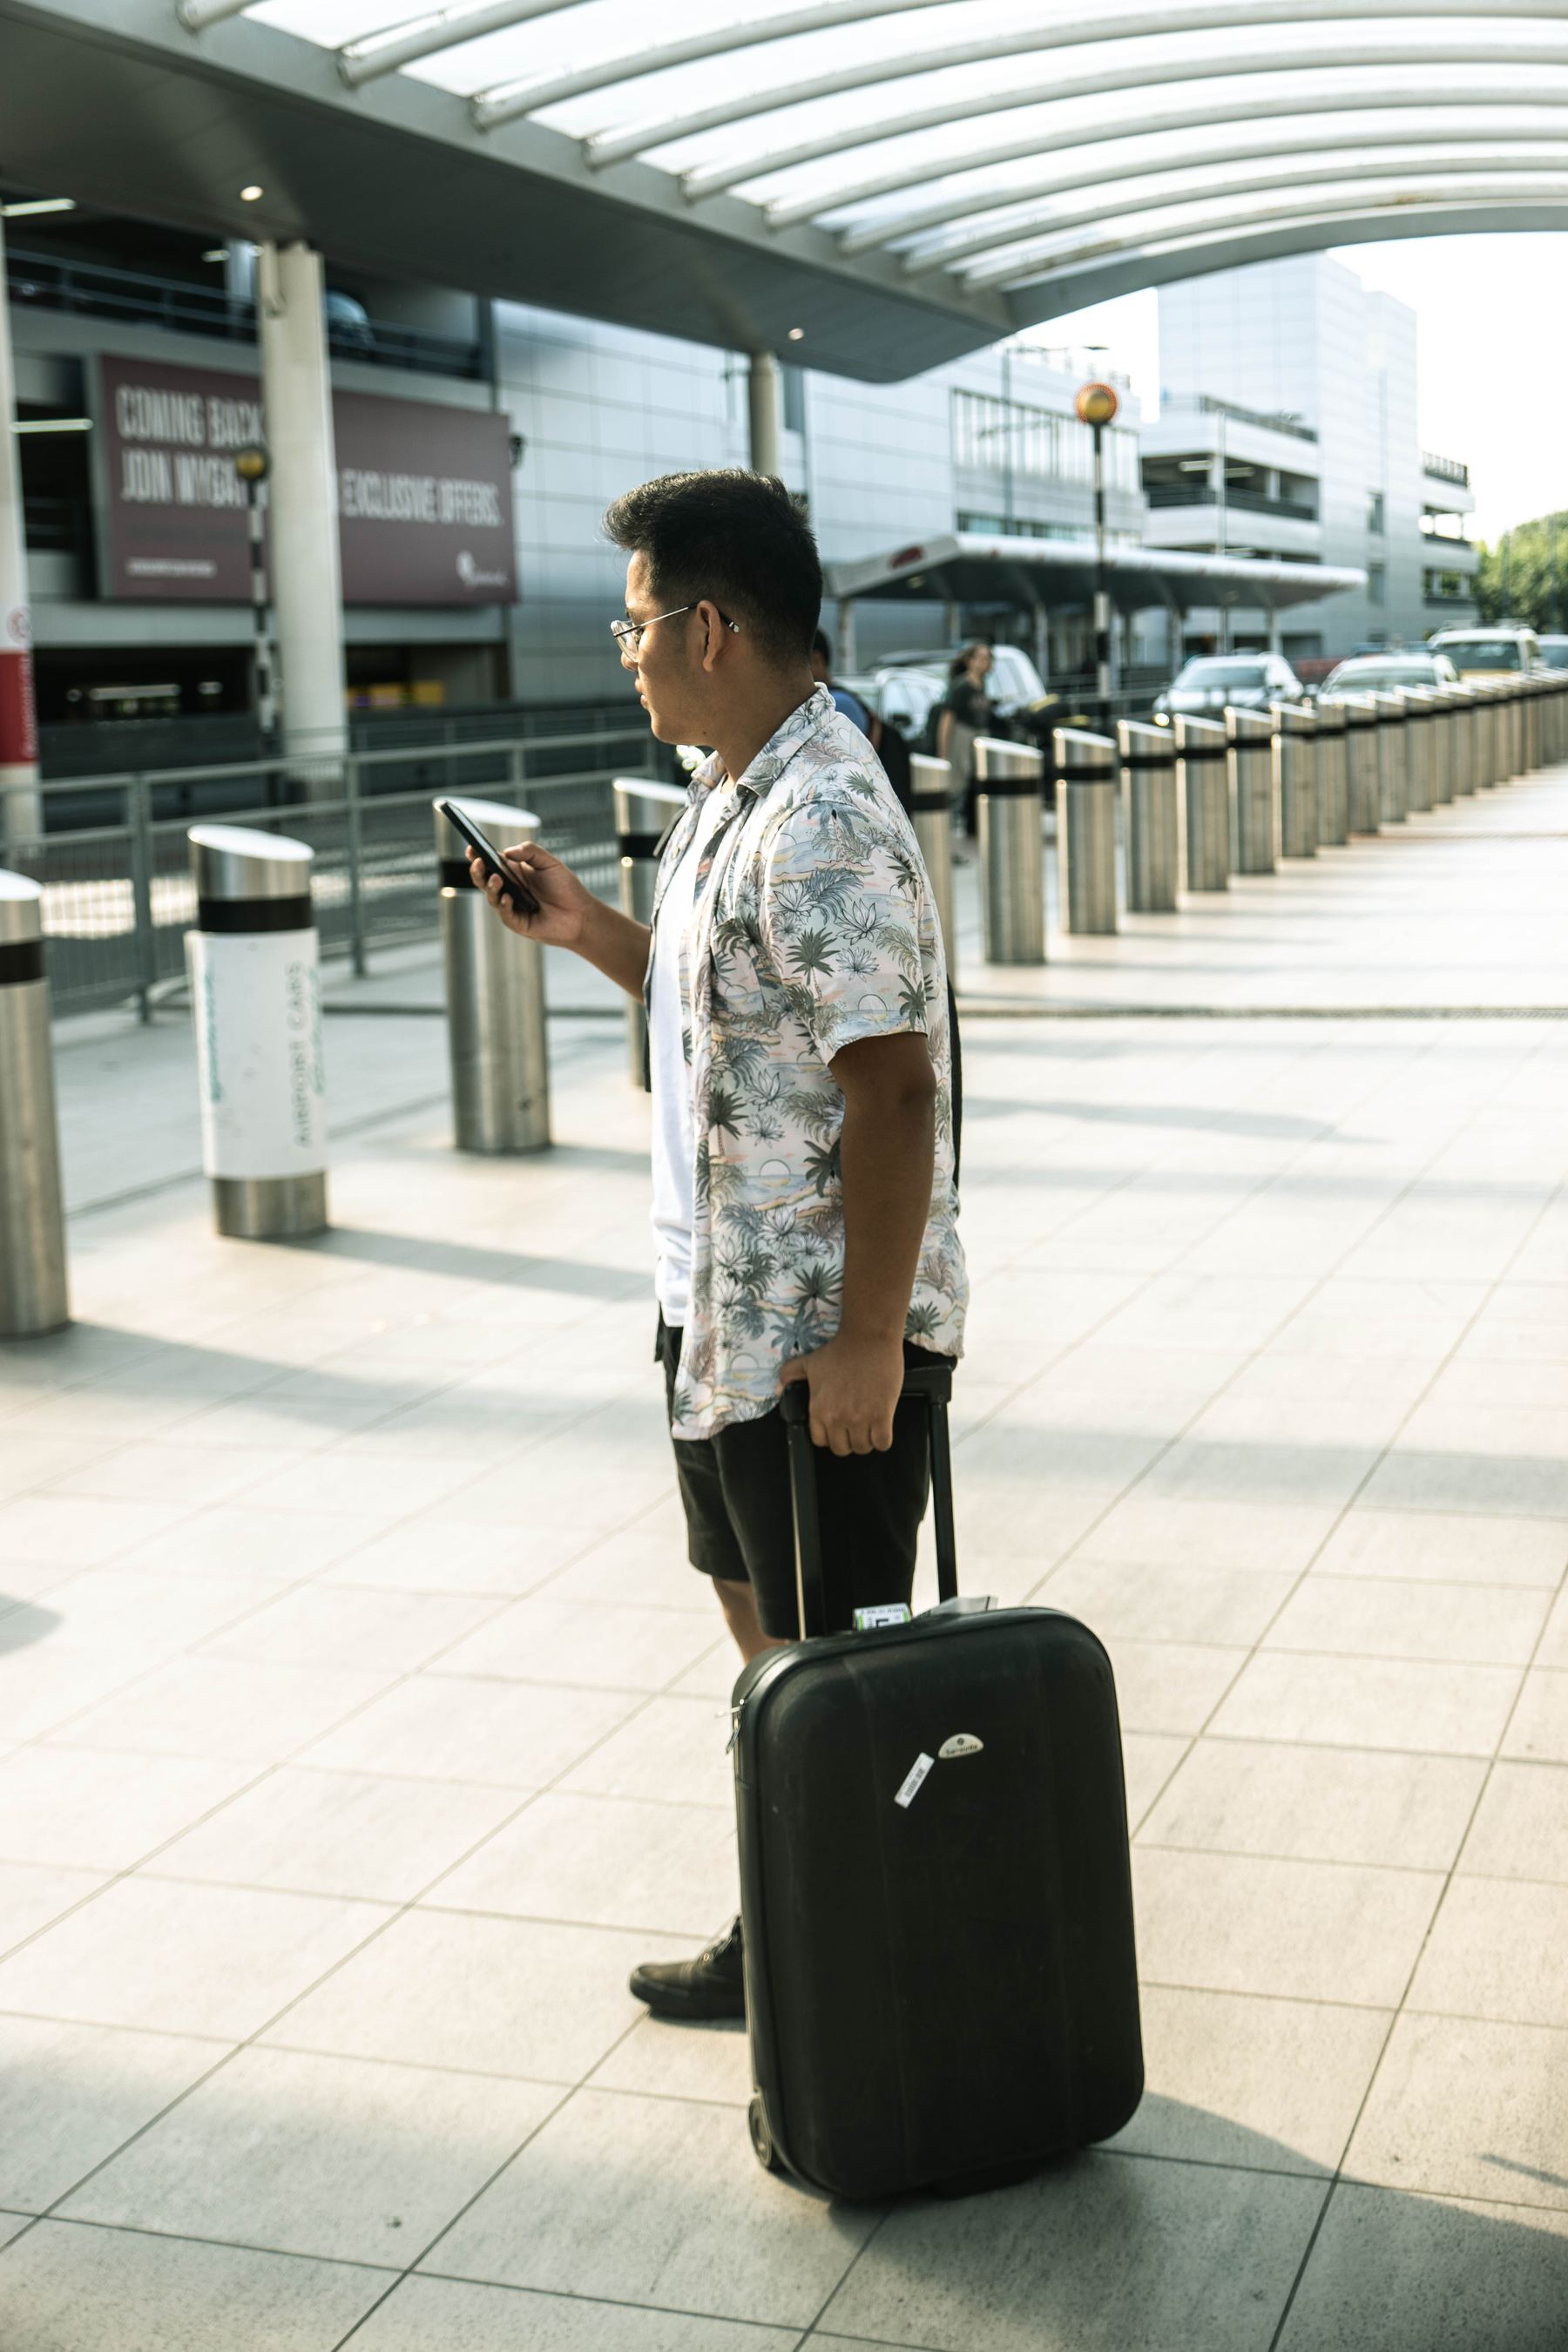 man at airport with luggage looking at phone